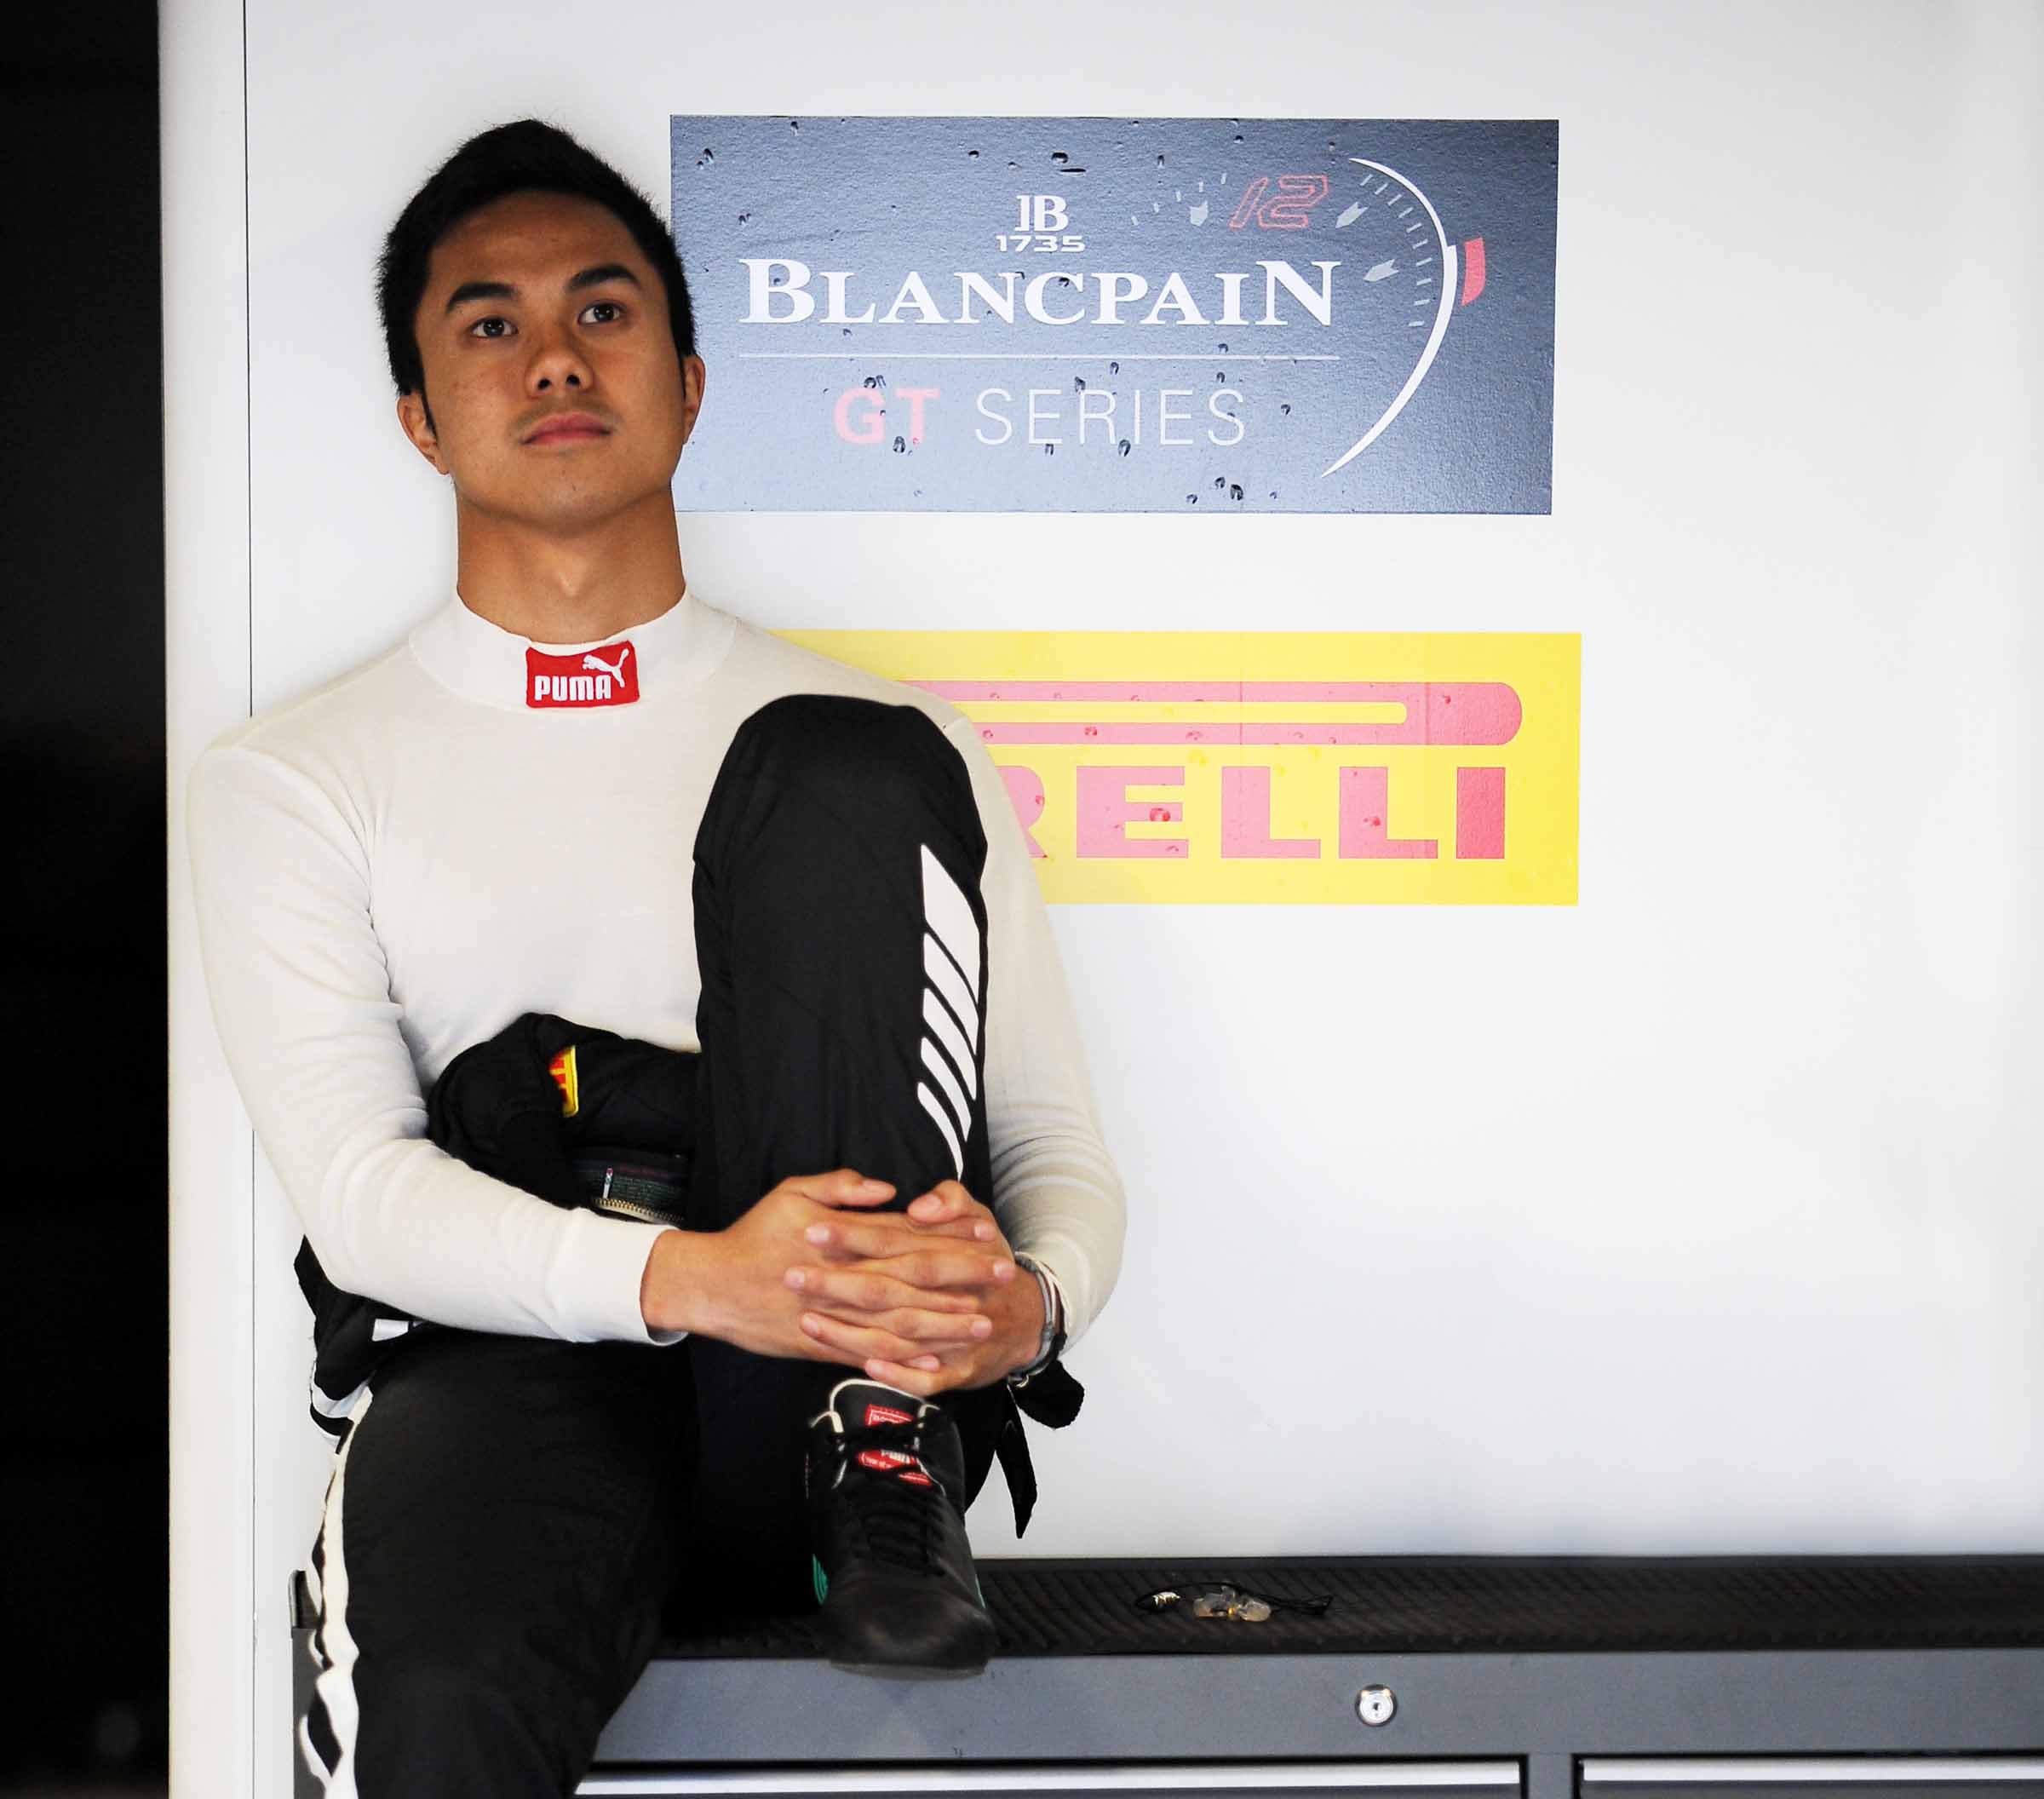 Jazeman is competing in his first full season of sportscar racing this year, campaigning the Blancpain GT Series, two European sportscars championship, with the Sprint Series featuring one hour races and the Endurance Series featuring three and six hour events.